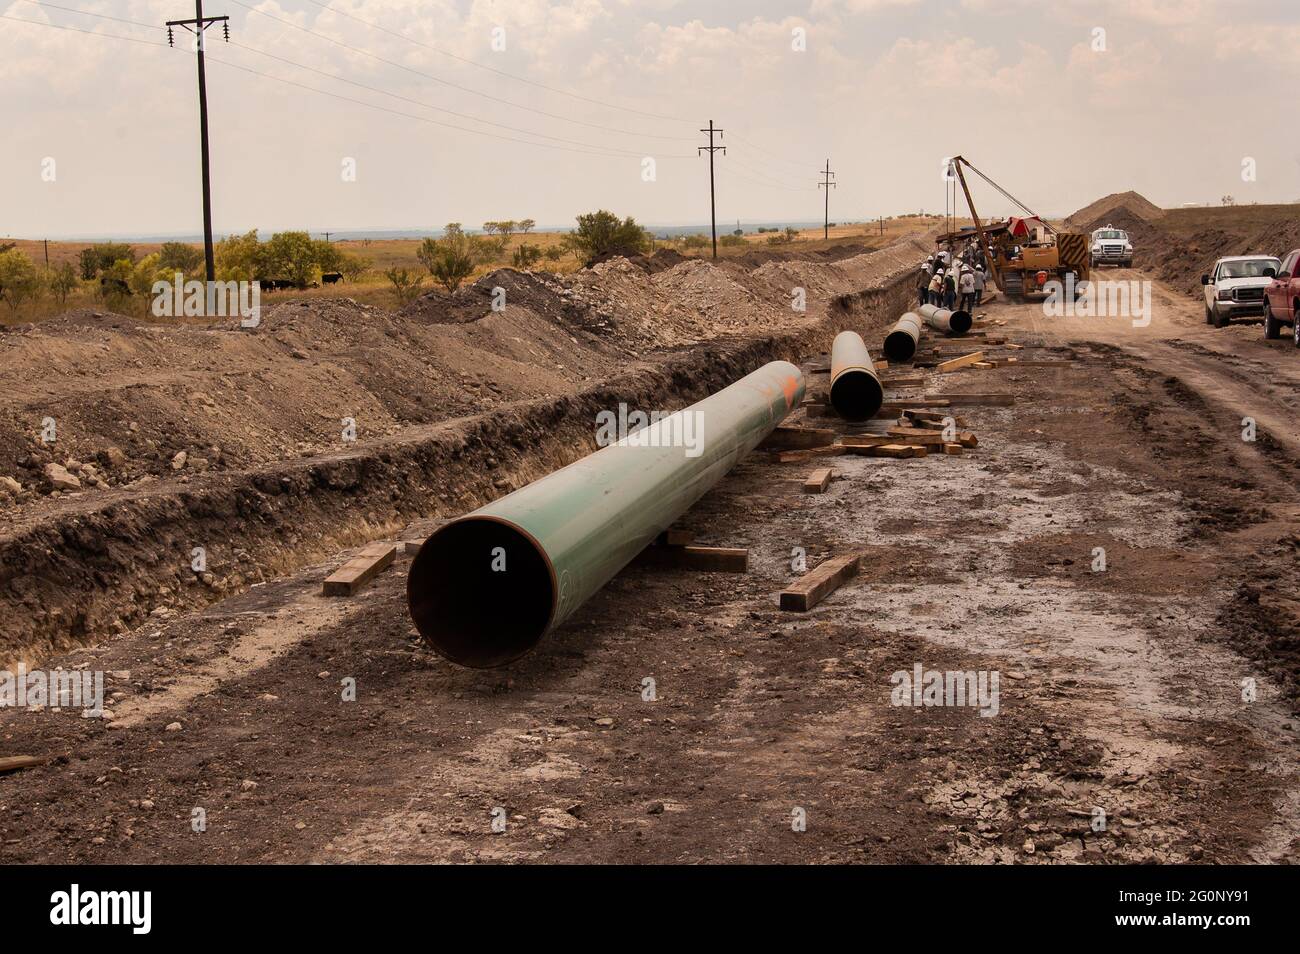 Natural gas pipeline built in north Texas getting natural gas to market. Pipes welded together and busied underground carry natural gas from wells to refineries. High-pressure fracturing opened up new and old oil fields in Texas and helped move the country away from using coal. Stock Photo